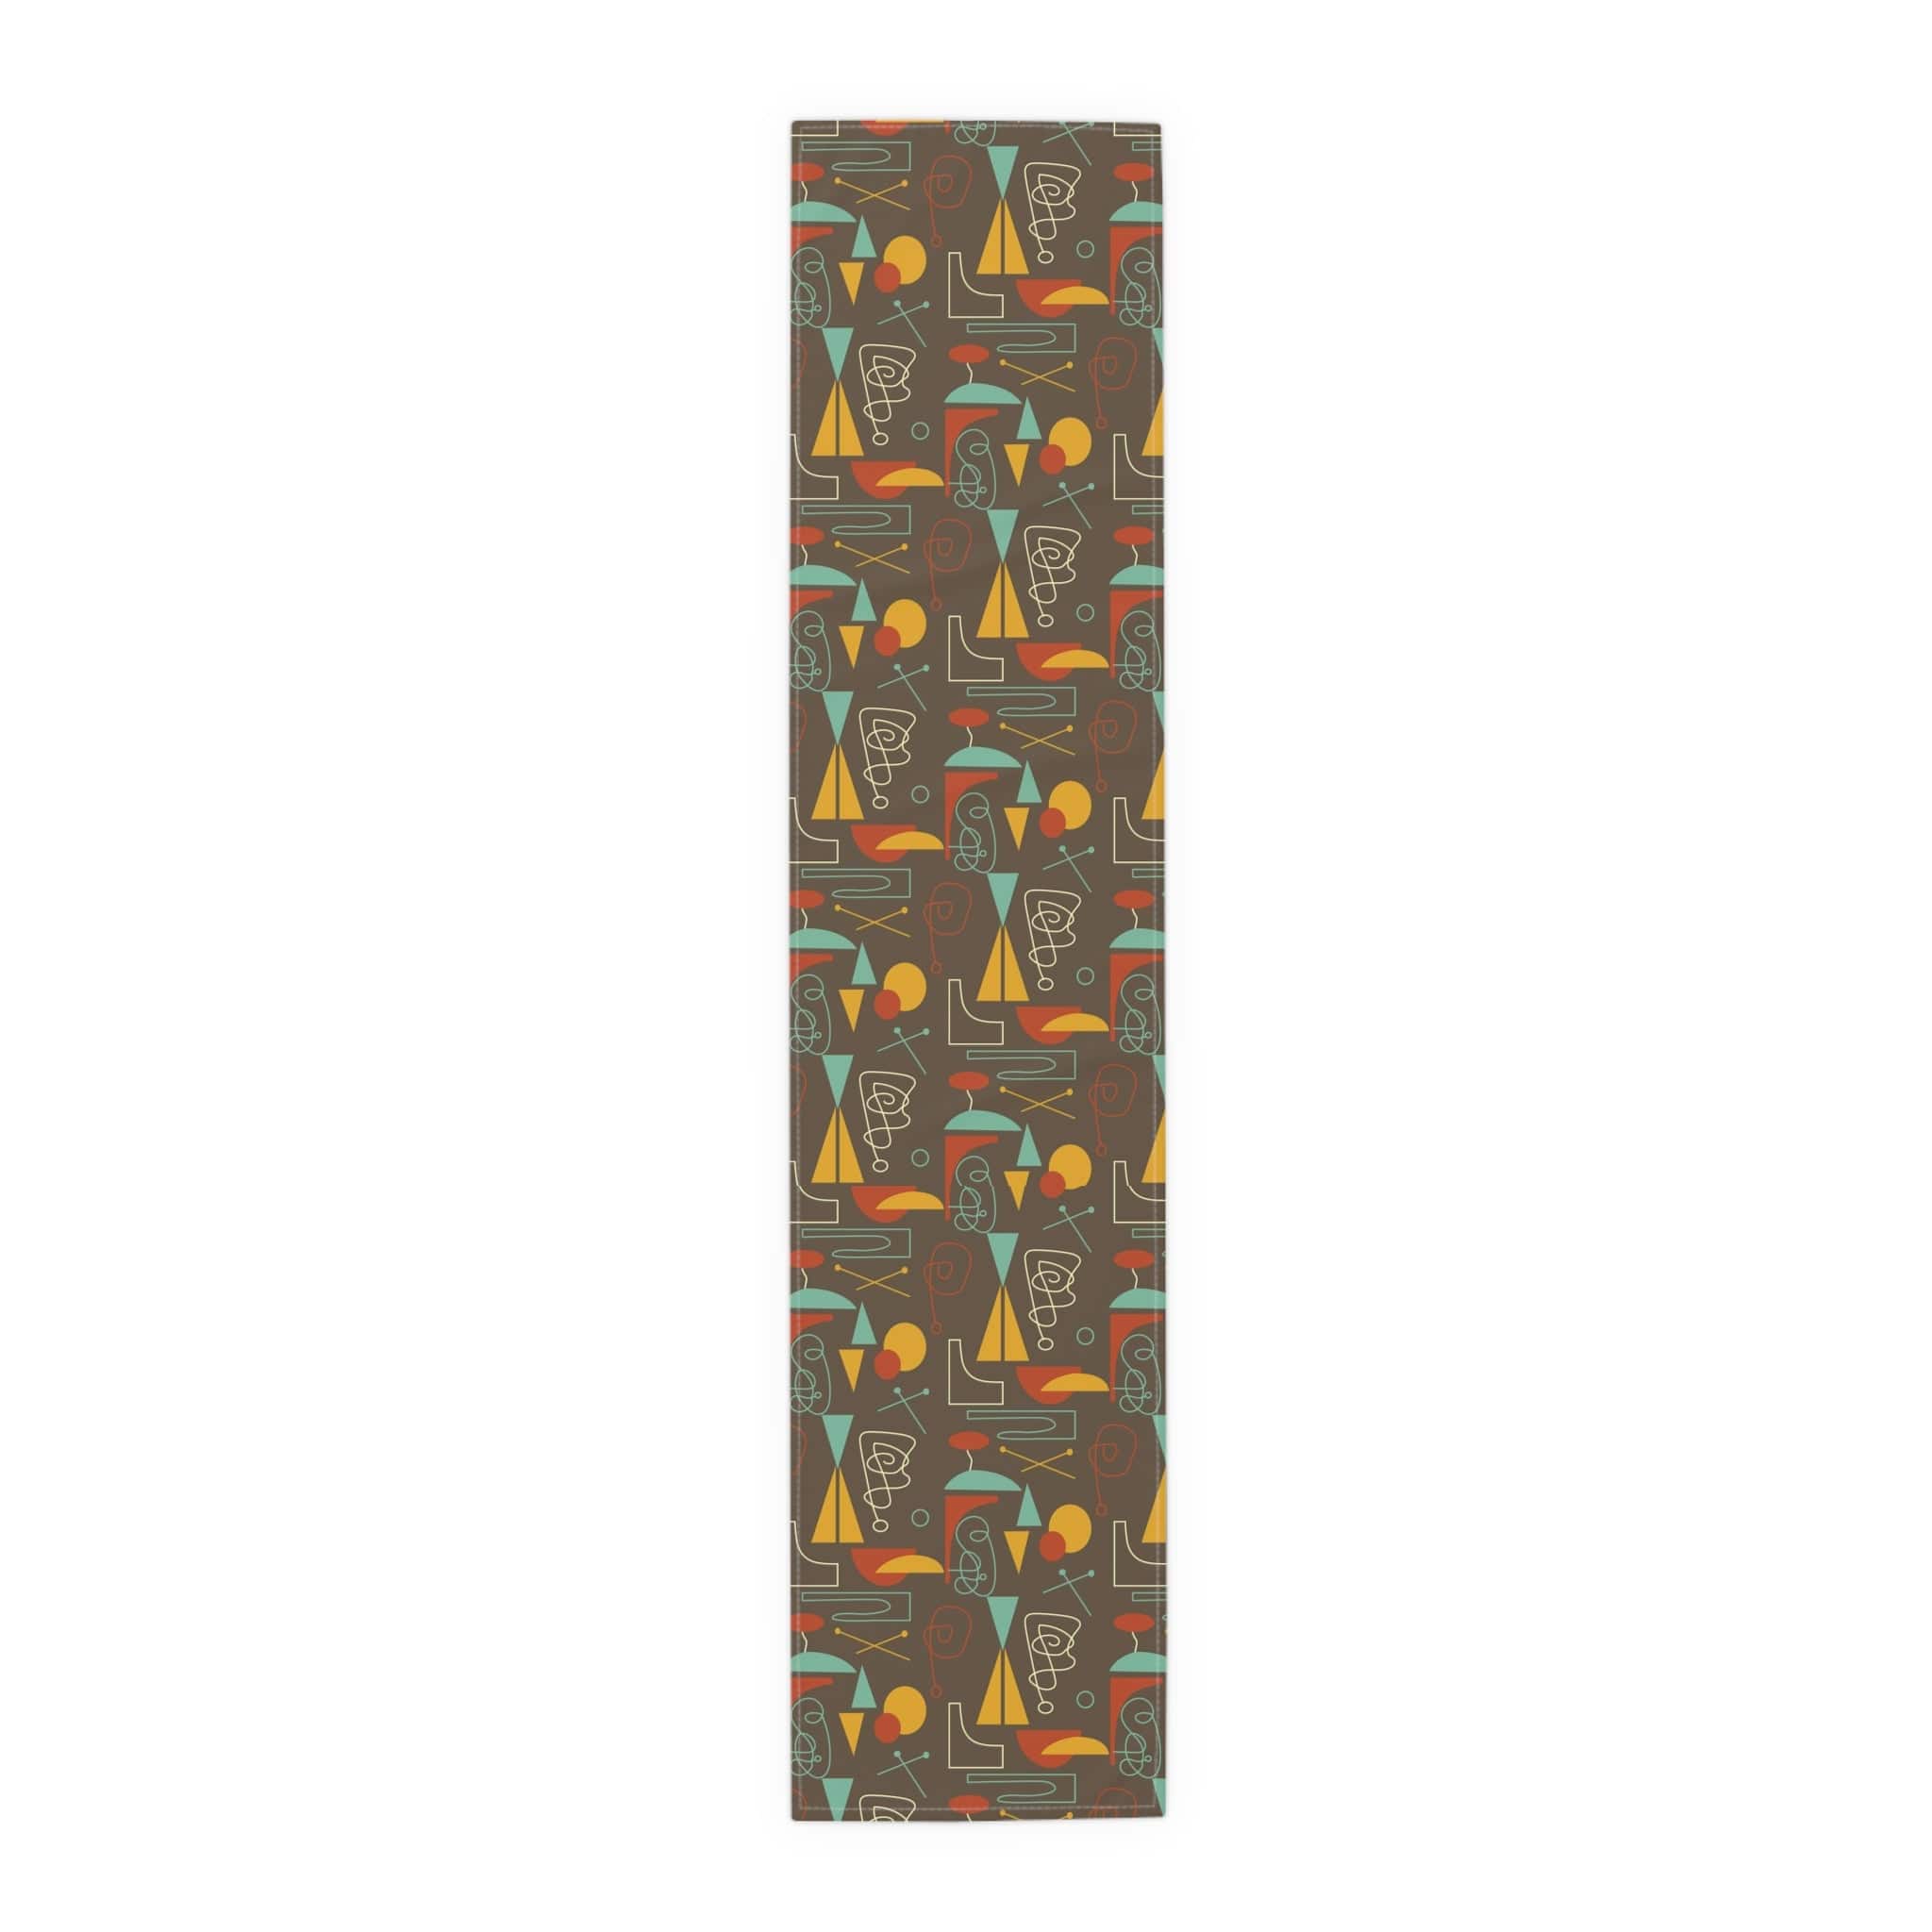 Kate McEnroe New York 1950s Atomic Retro Mid Century Modern Geometric Abstract Table Runner (Cotton, Poly) Table Runners